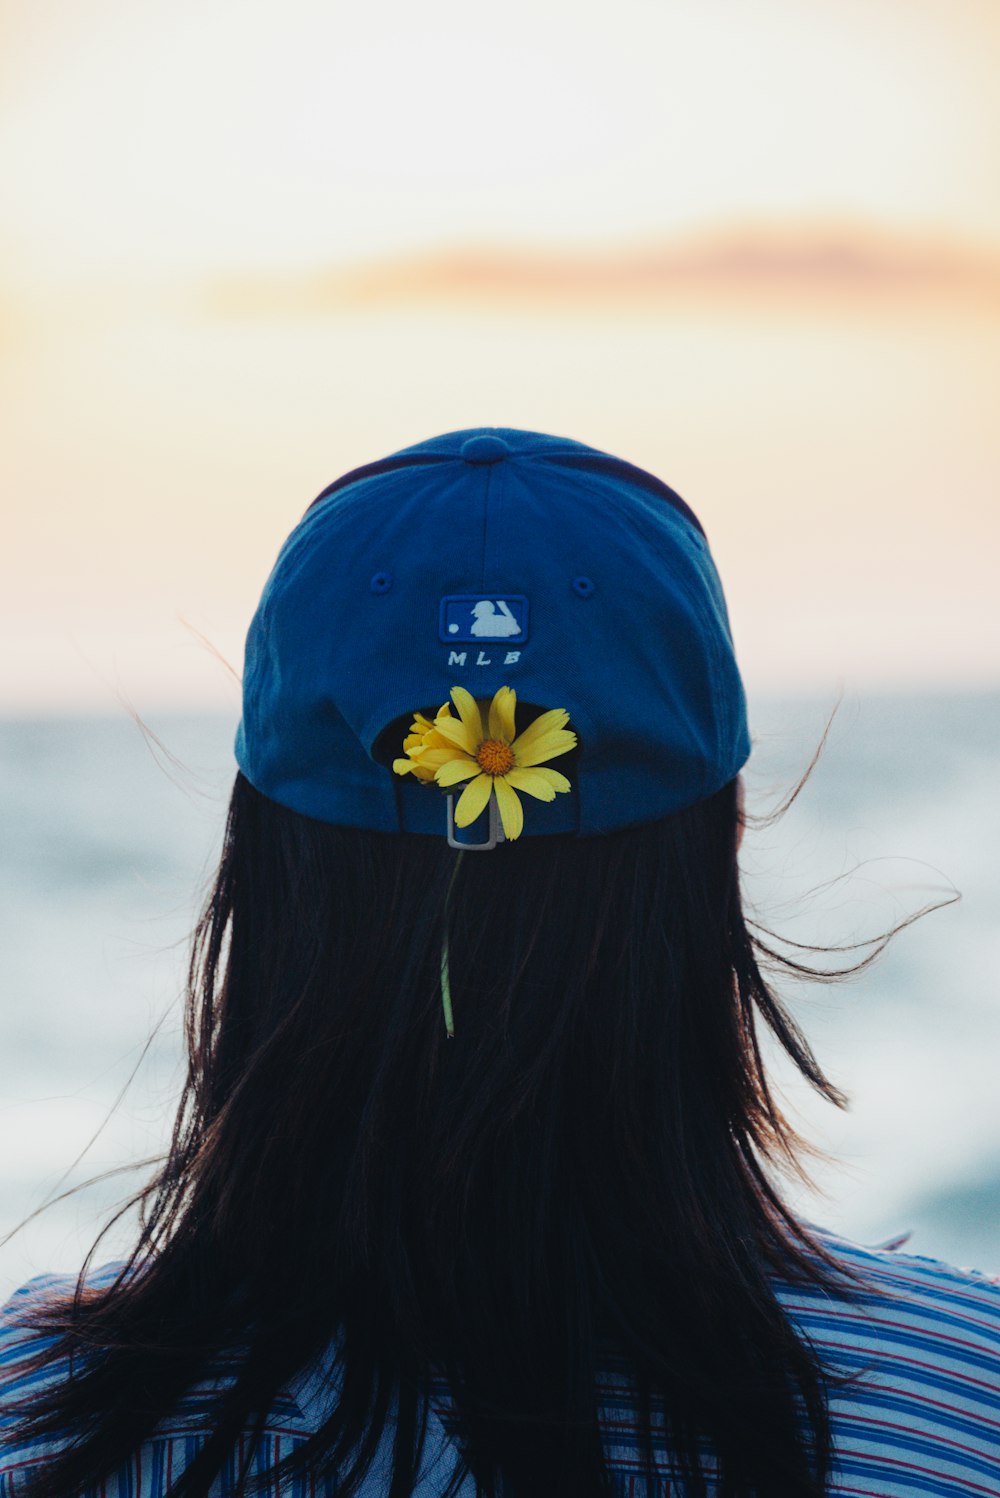 the back of a person wearing a hat with a flower on it